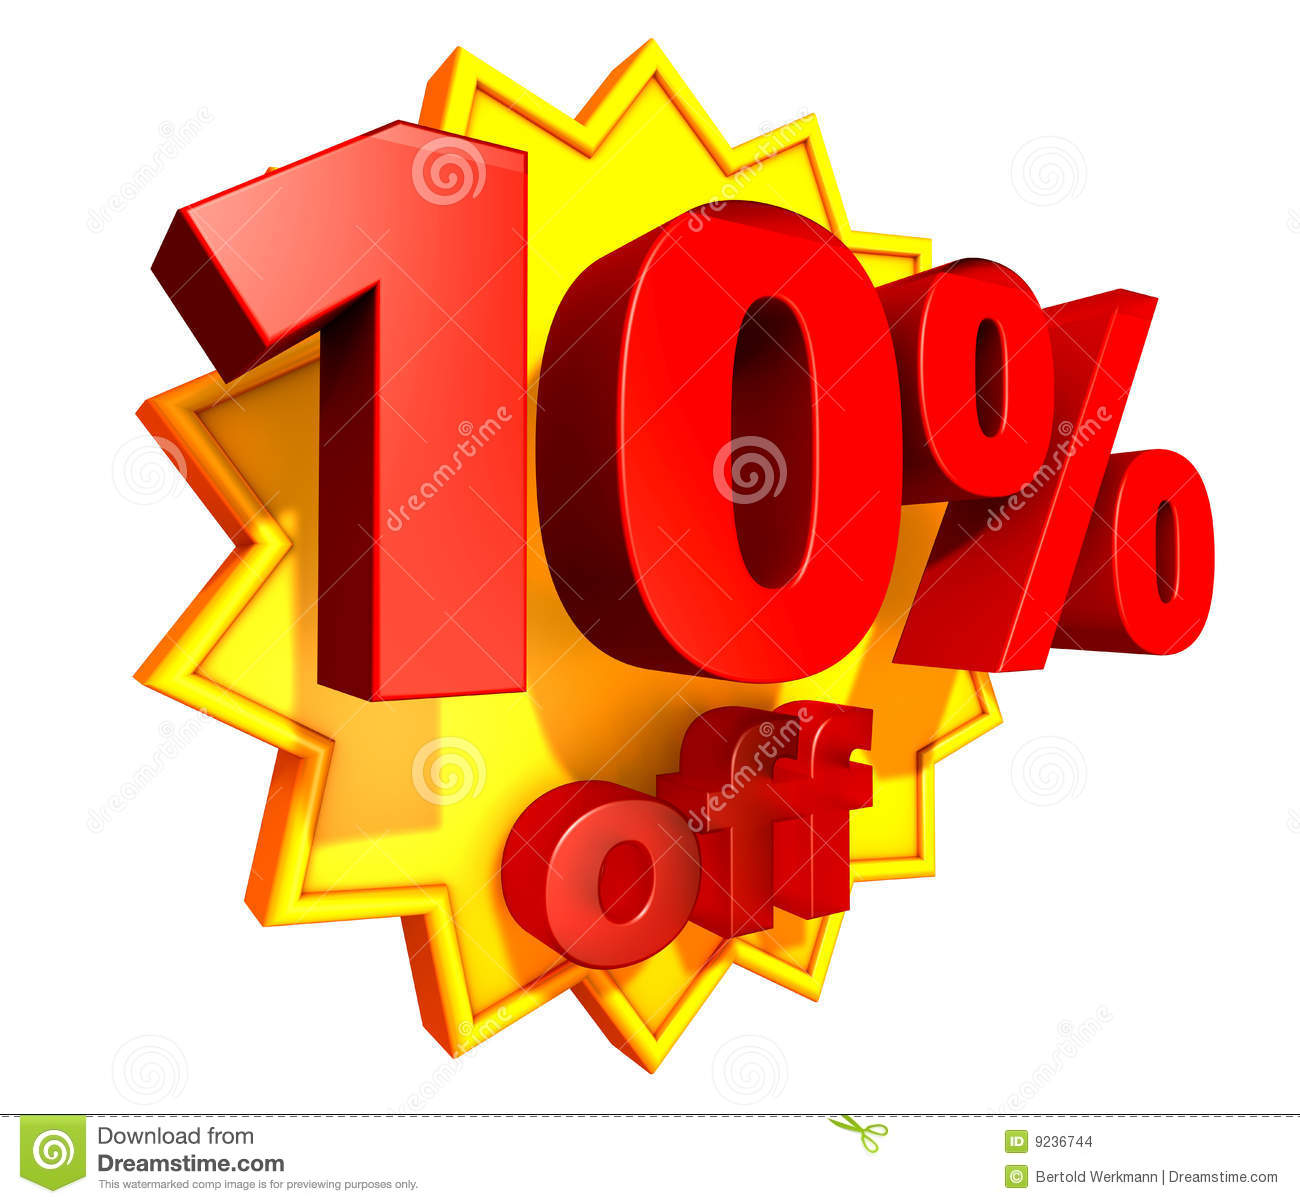 Sign For 10 Per Cent Off In Red Ciphers At A Yellow Star On A White